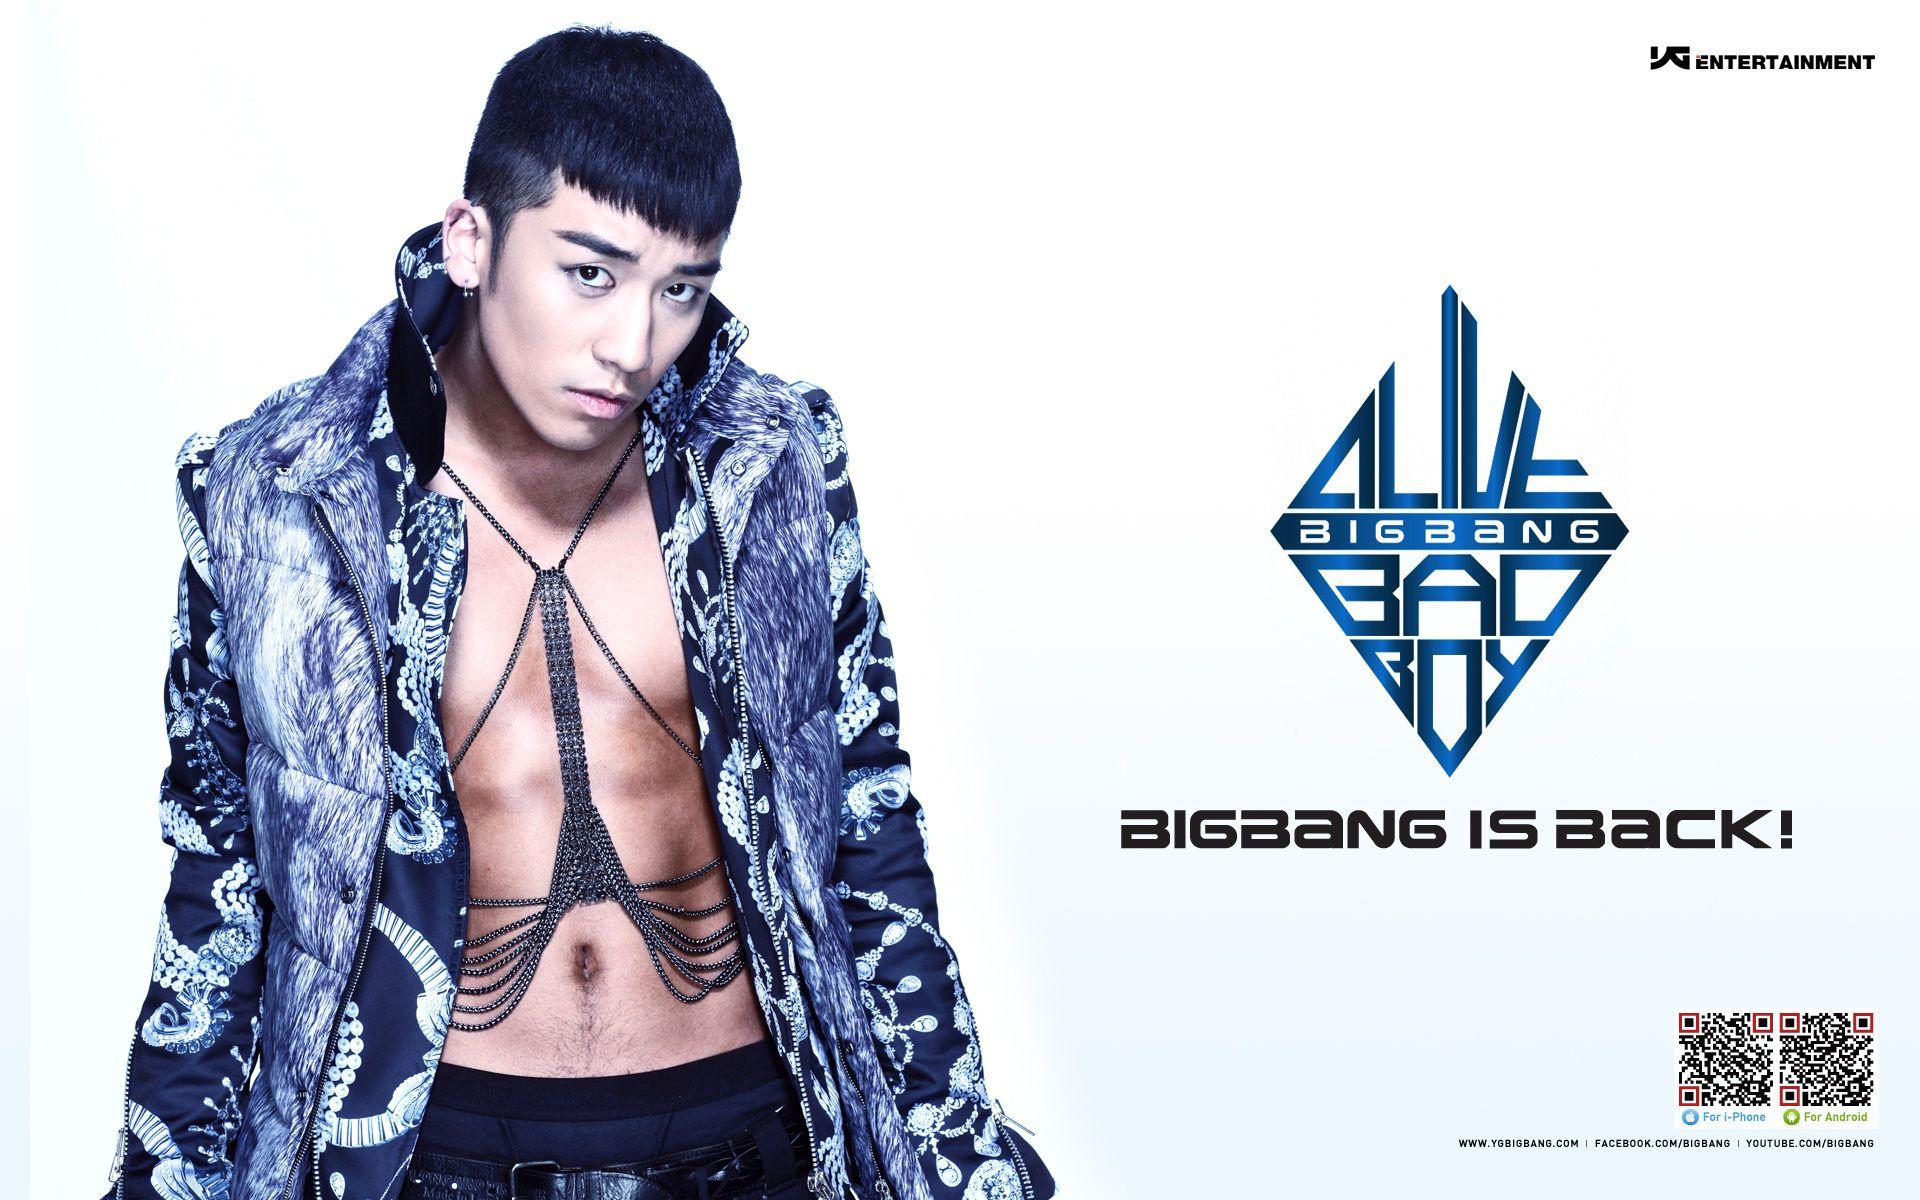 YG Entertainment immagini Seungri HD wallpaper and background foto